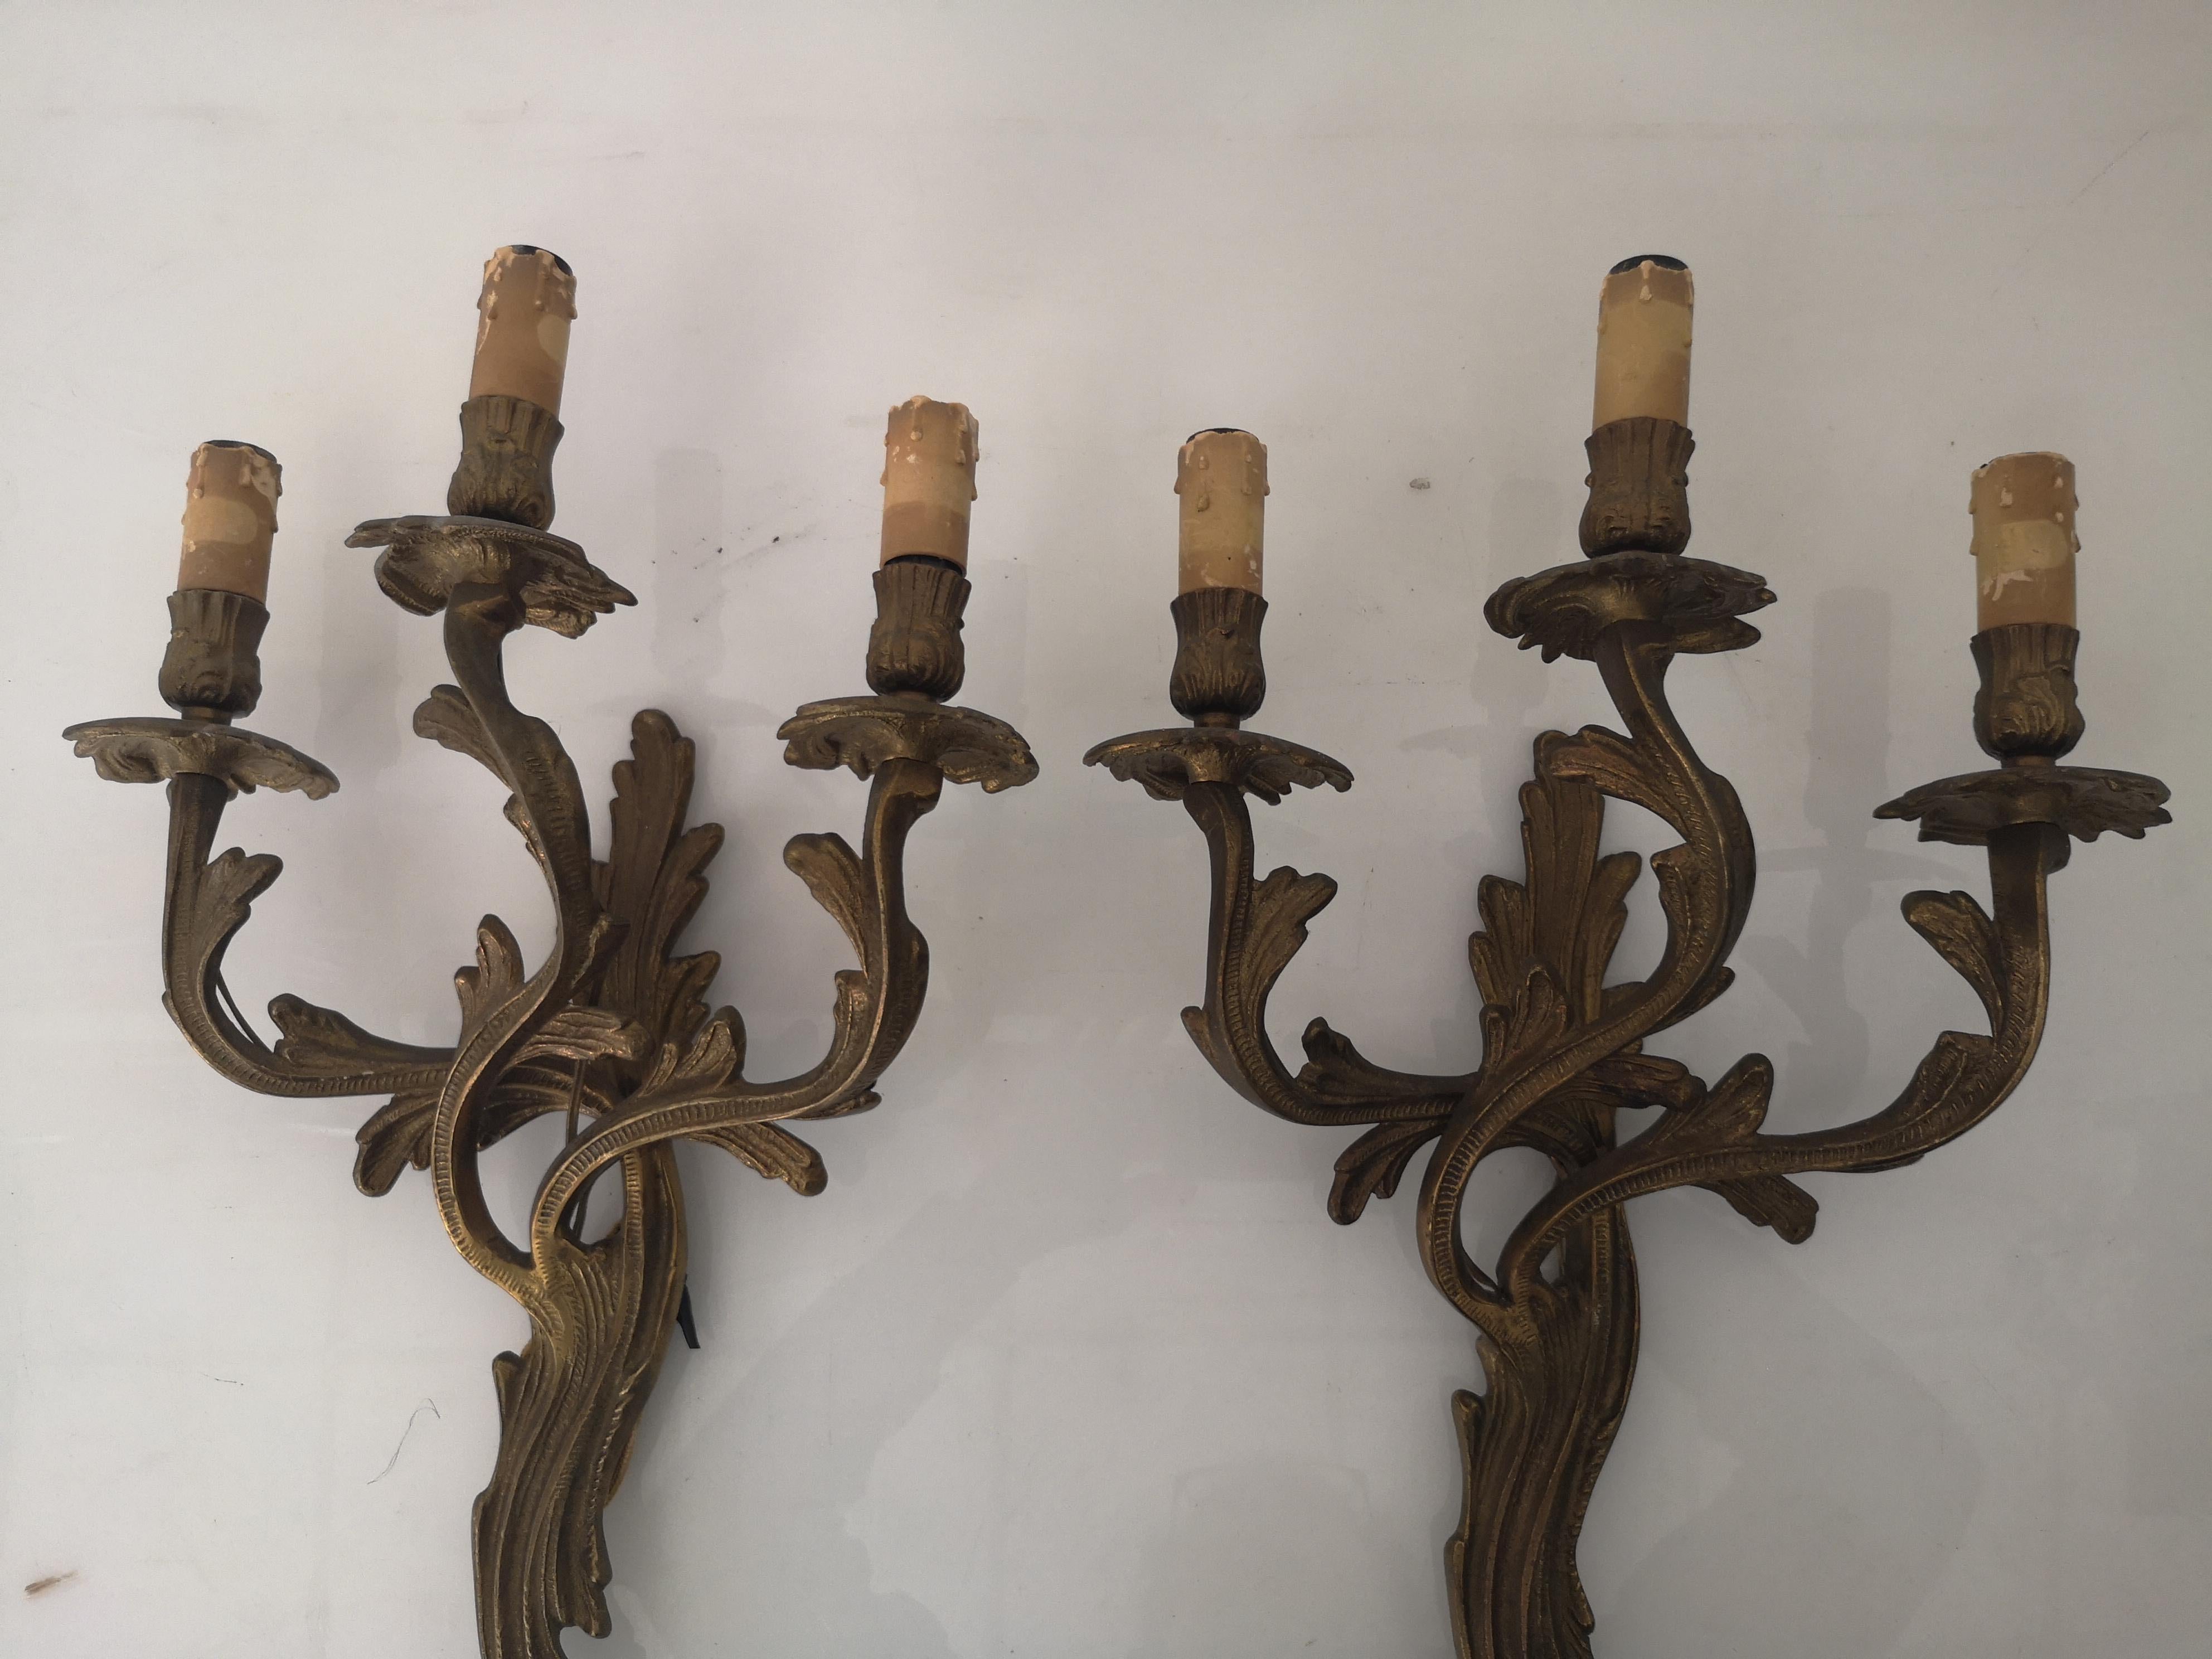 Pair of 3-light bronze wall sconces in Louis XV style 1940s
The sconces are electrified, although the system is always best reviewed.
Measures: 
Height      cm 50
Width 30 cm
Depth 15 cm